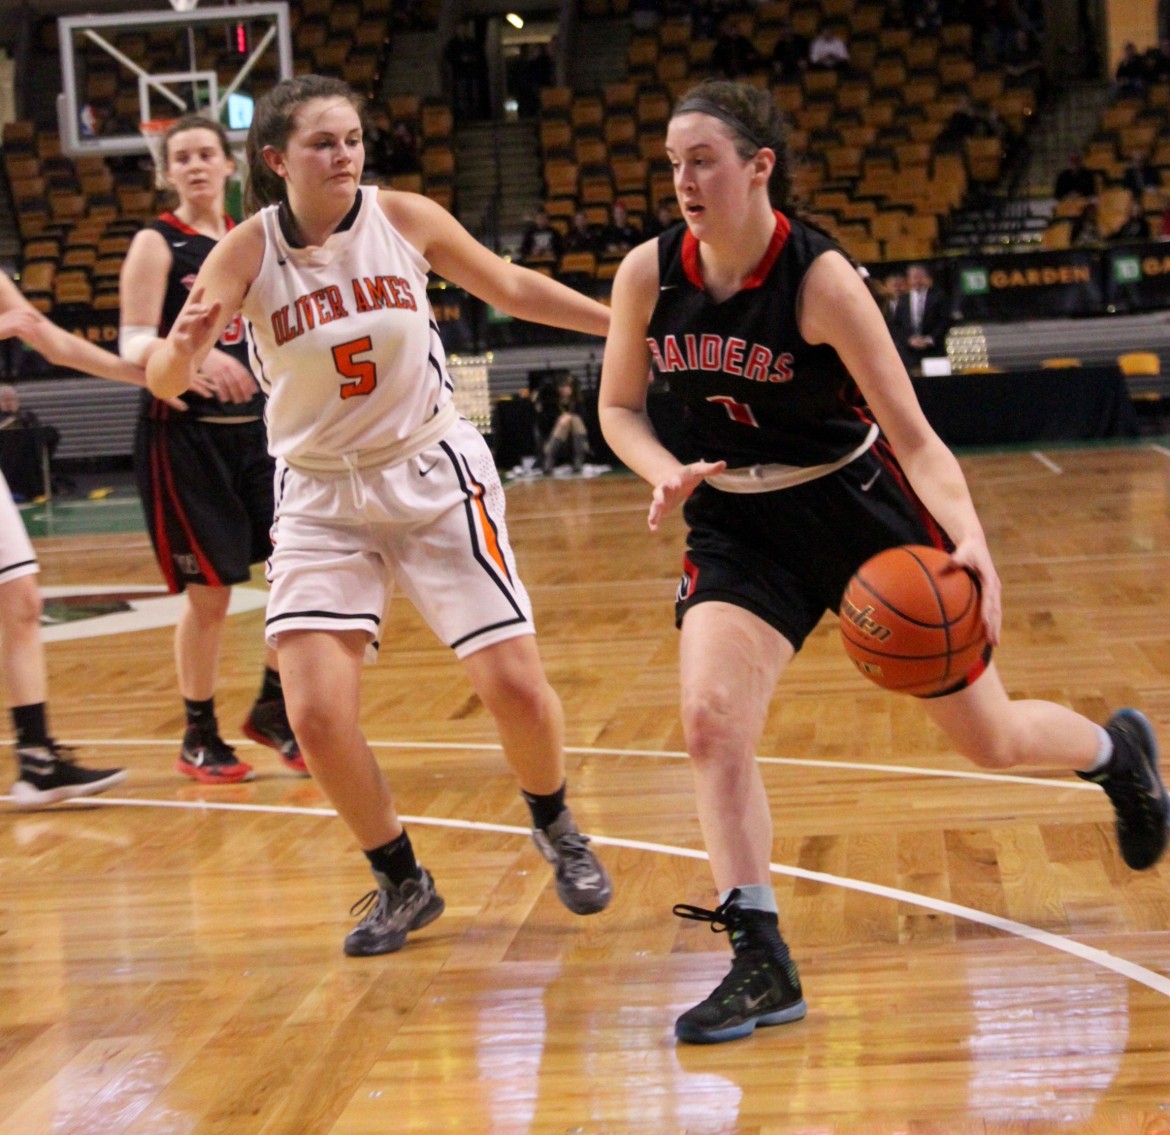 Watertown senior forward Felicia Korte scored 11 points in the Raiders' 48-34 win over Oliver Ames at the TD Garden.